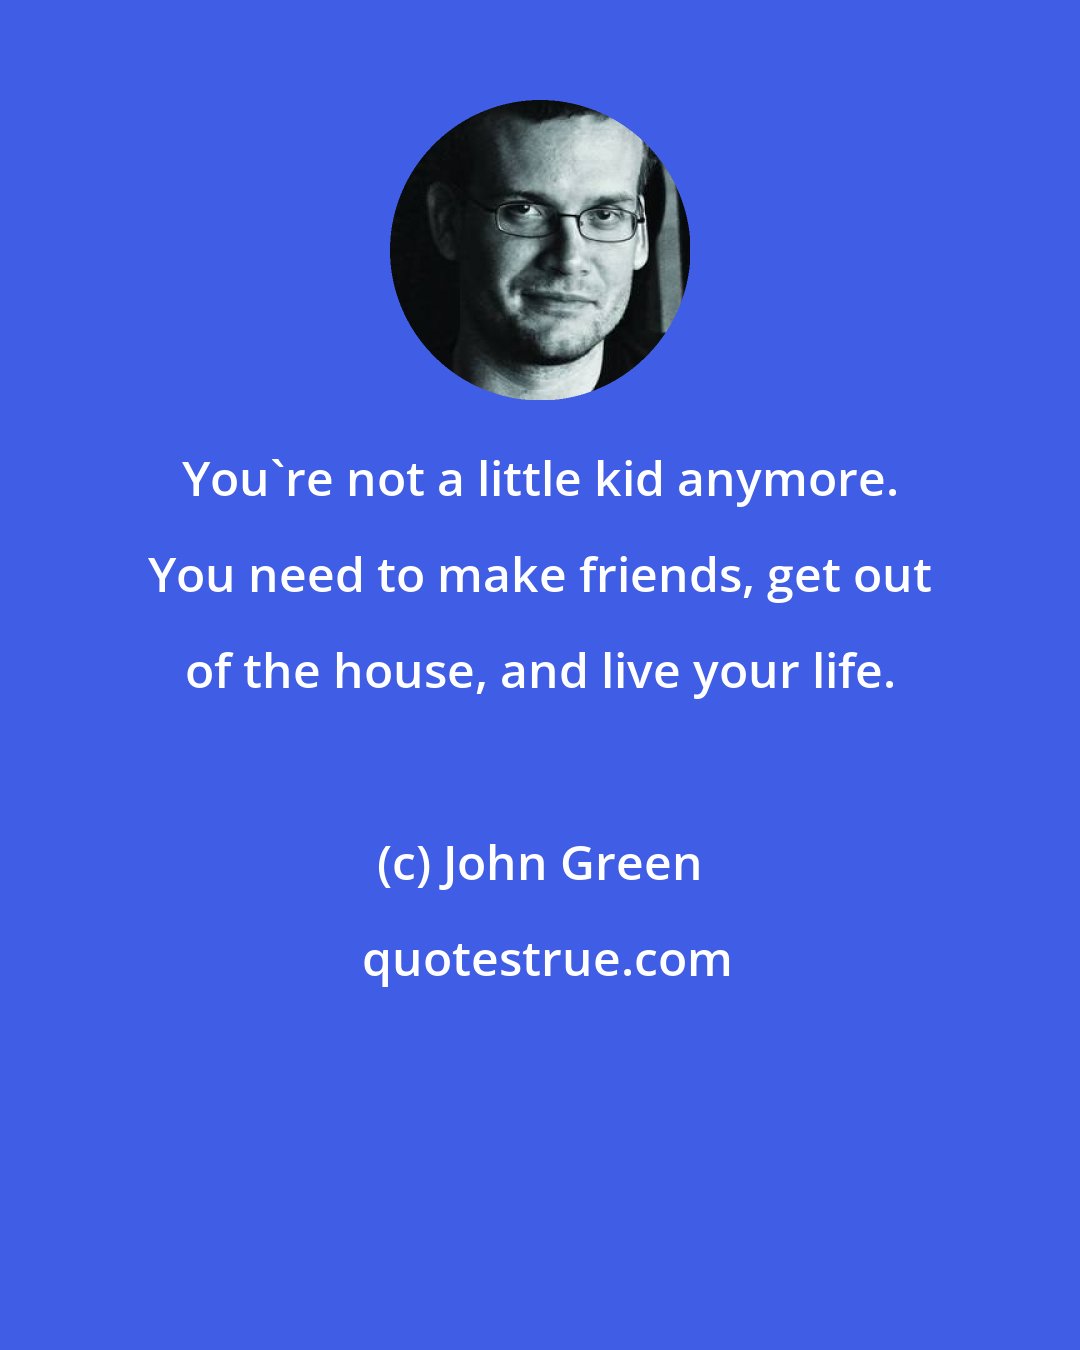 John Green: You're not a little kid anymore. You need to make friends, get out of the house, and live your life.